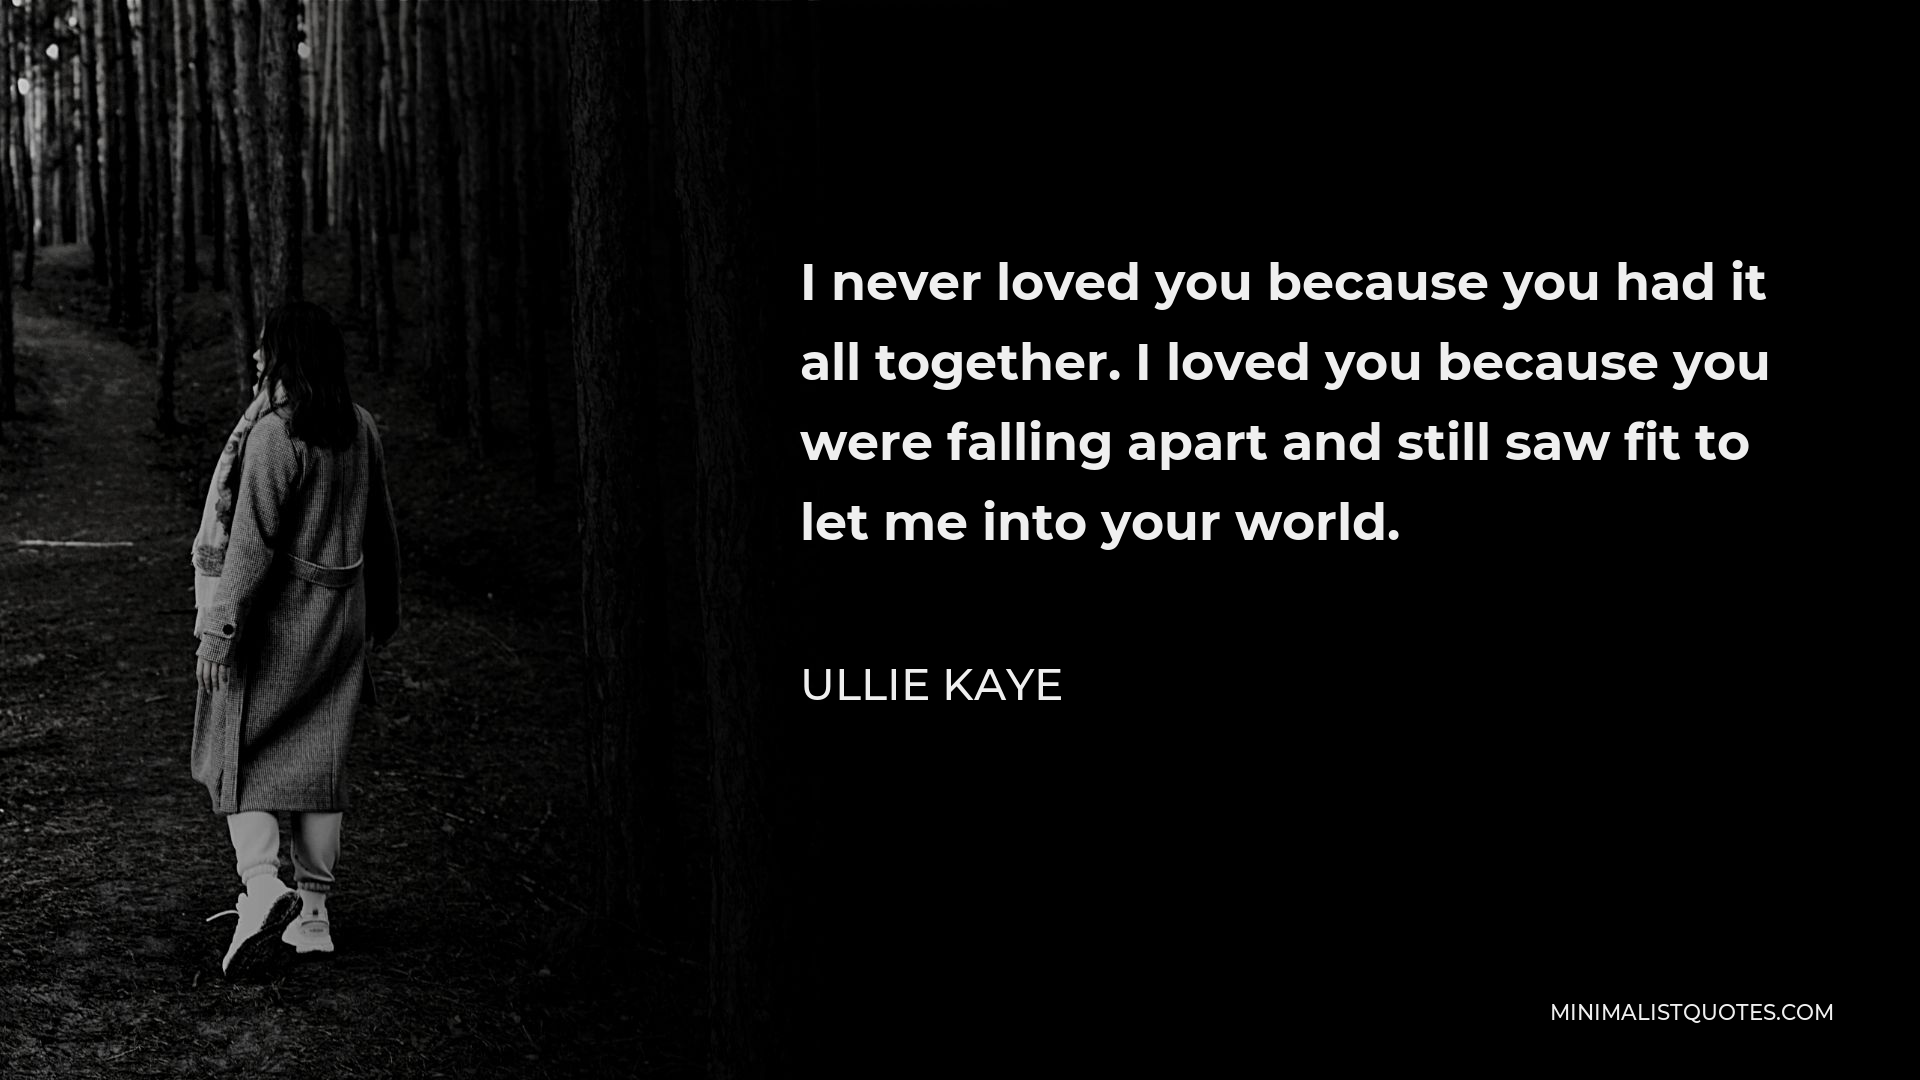 Ullie Kaye Quote - I never loved you because you had it all together. I loved you because you were falling apart and still saw fit to let me into your world.